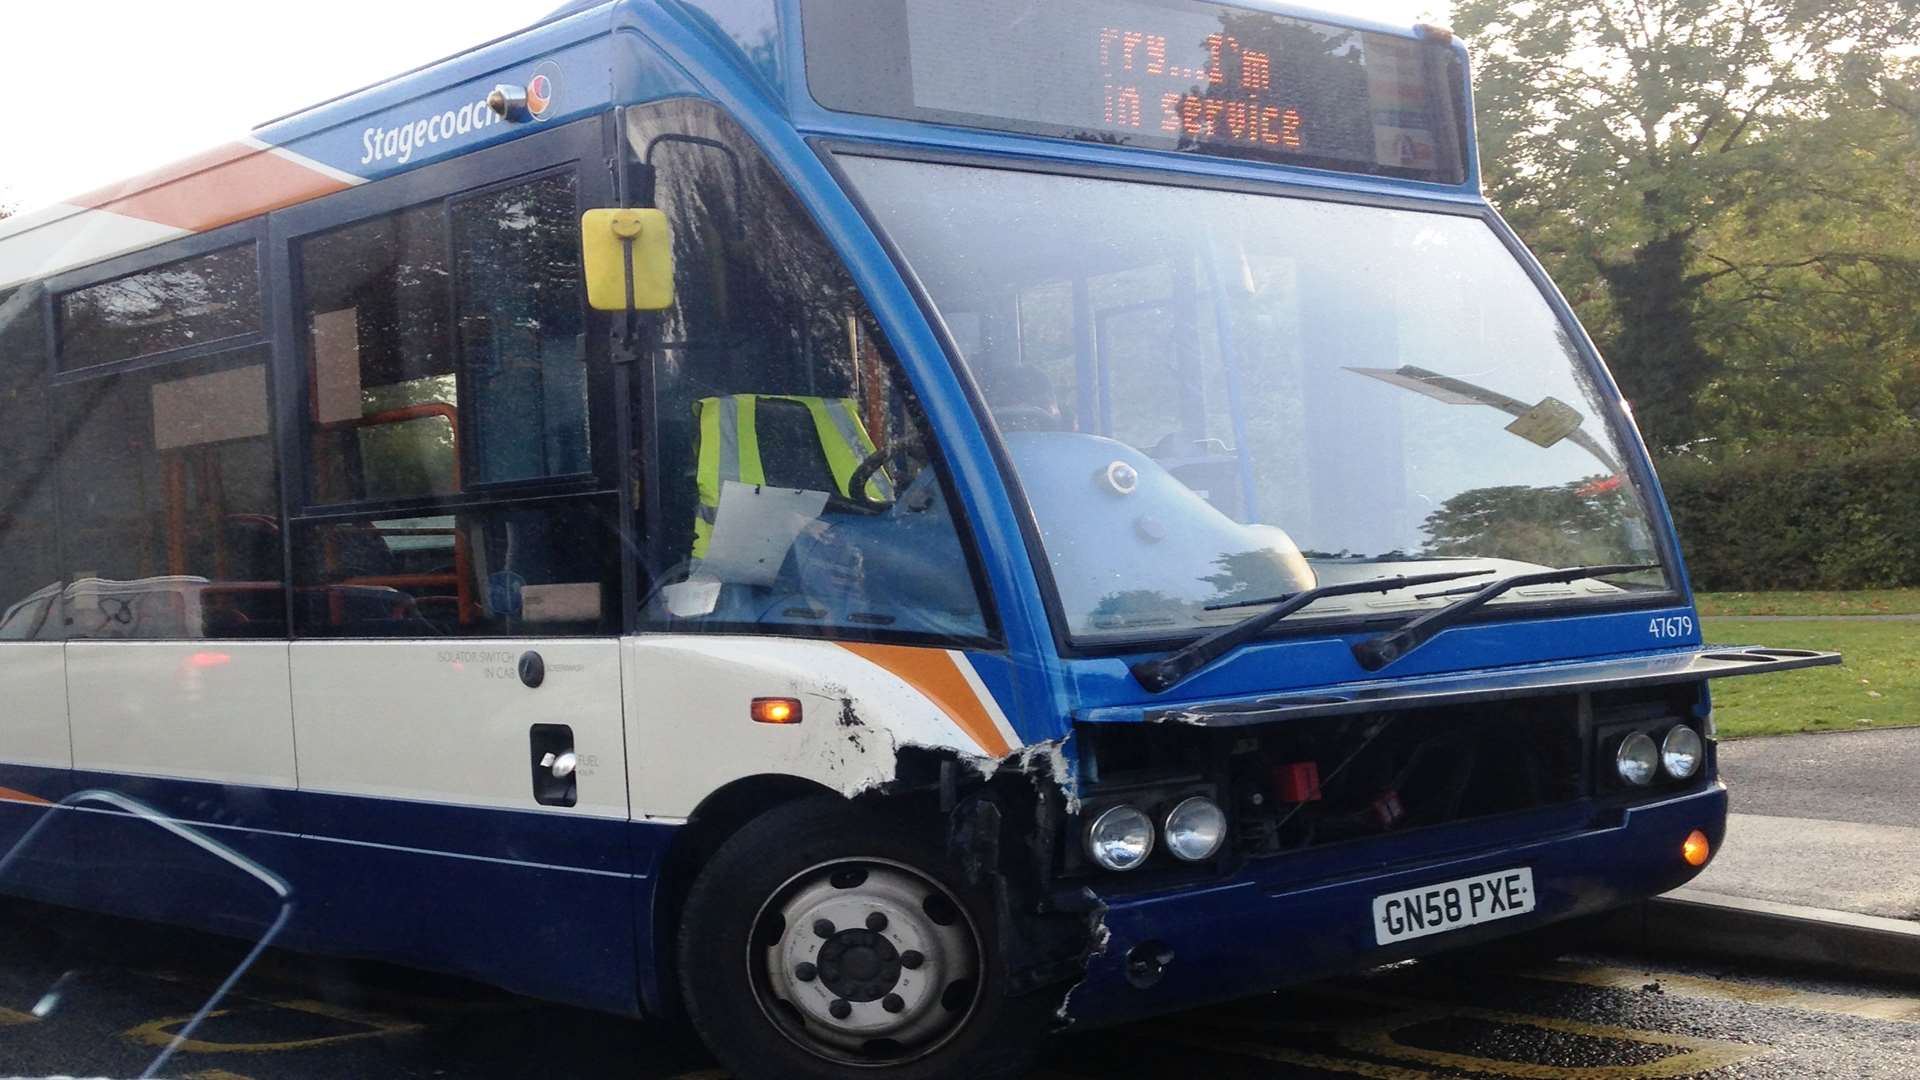 The bus was visibly damaged after the early-morning prang